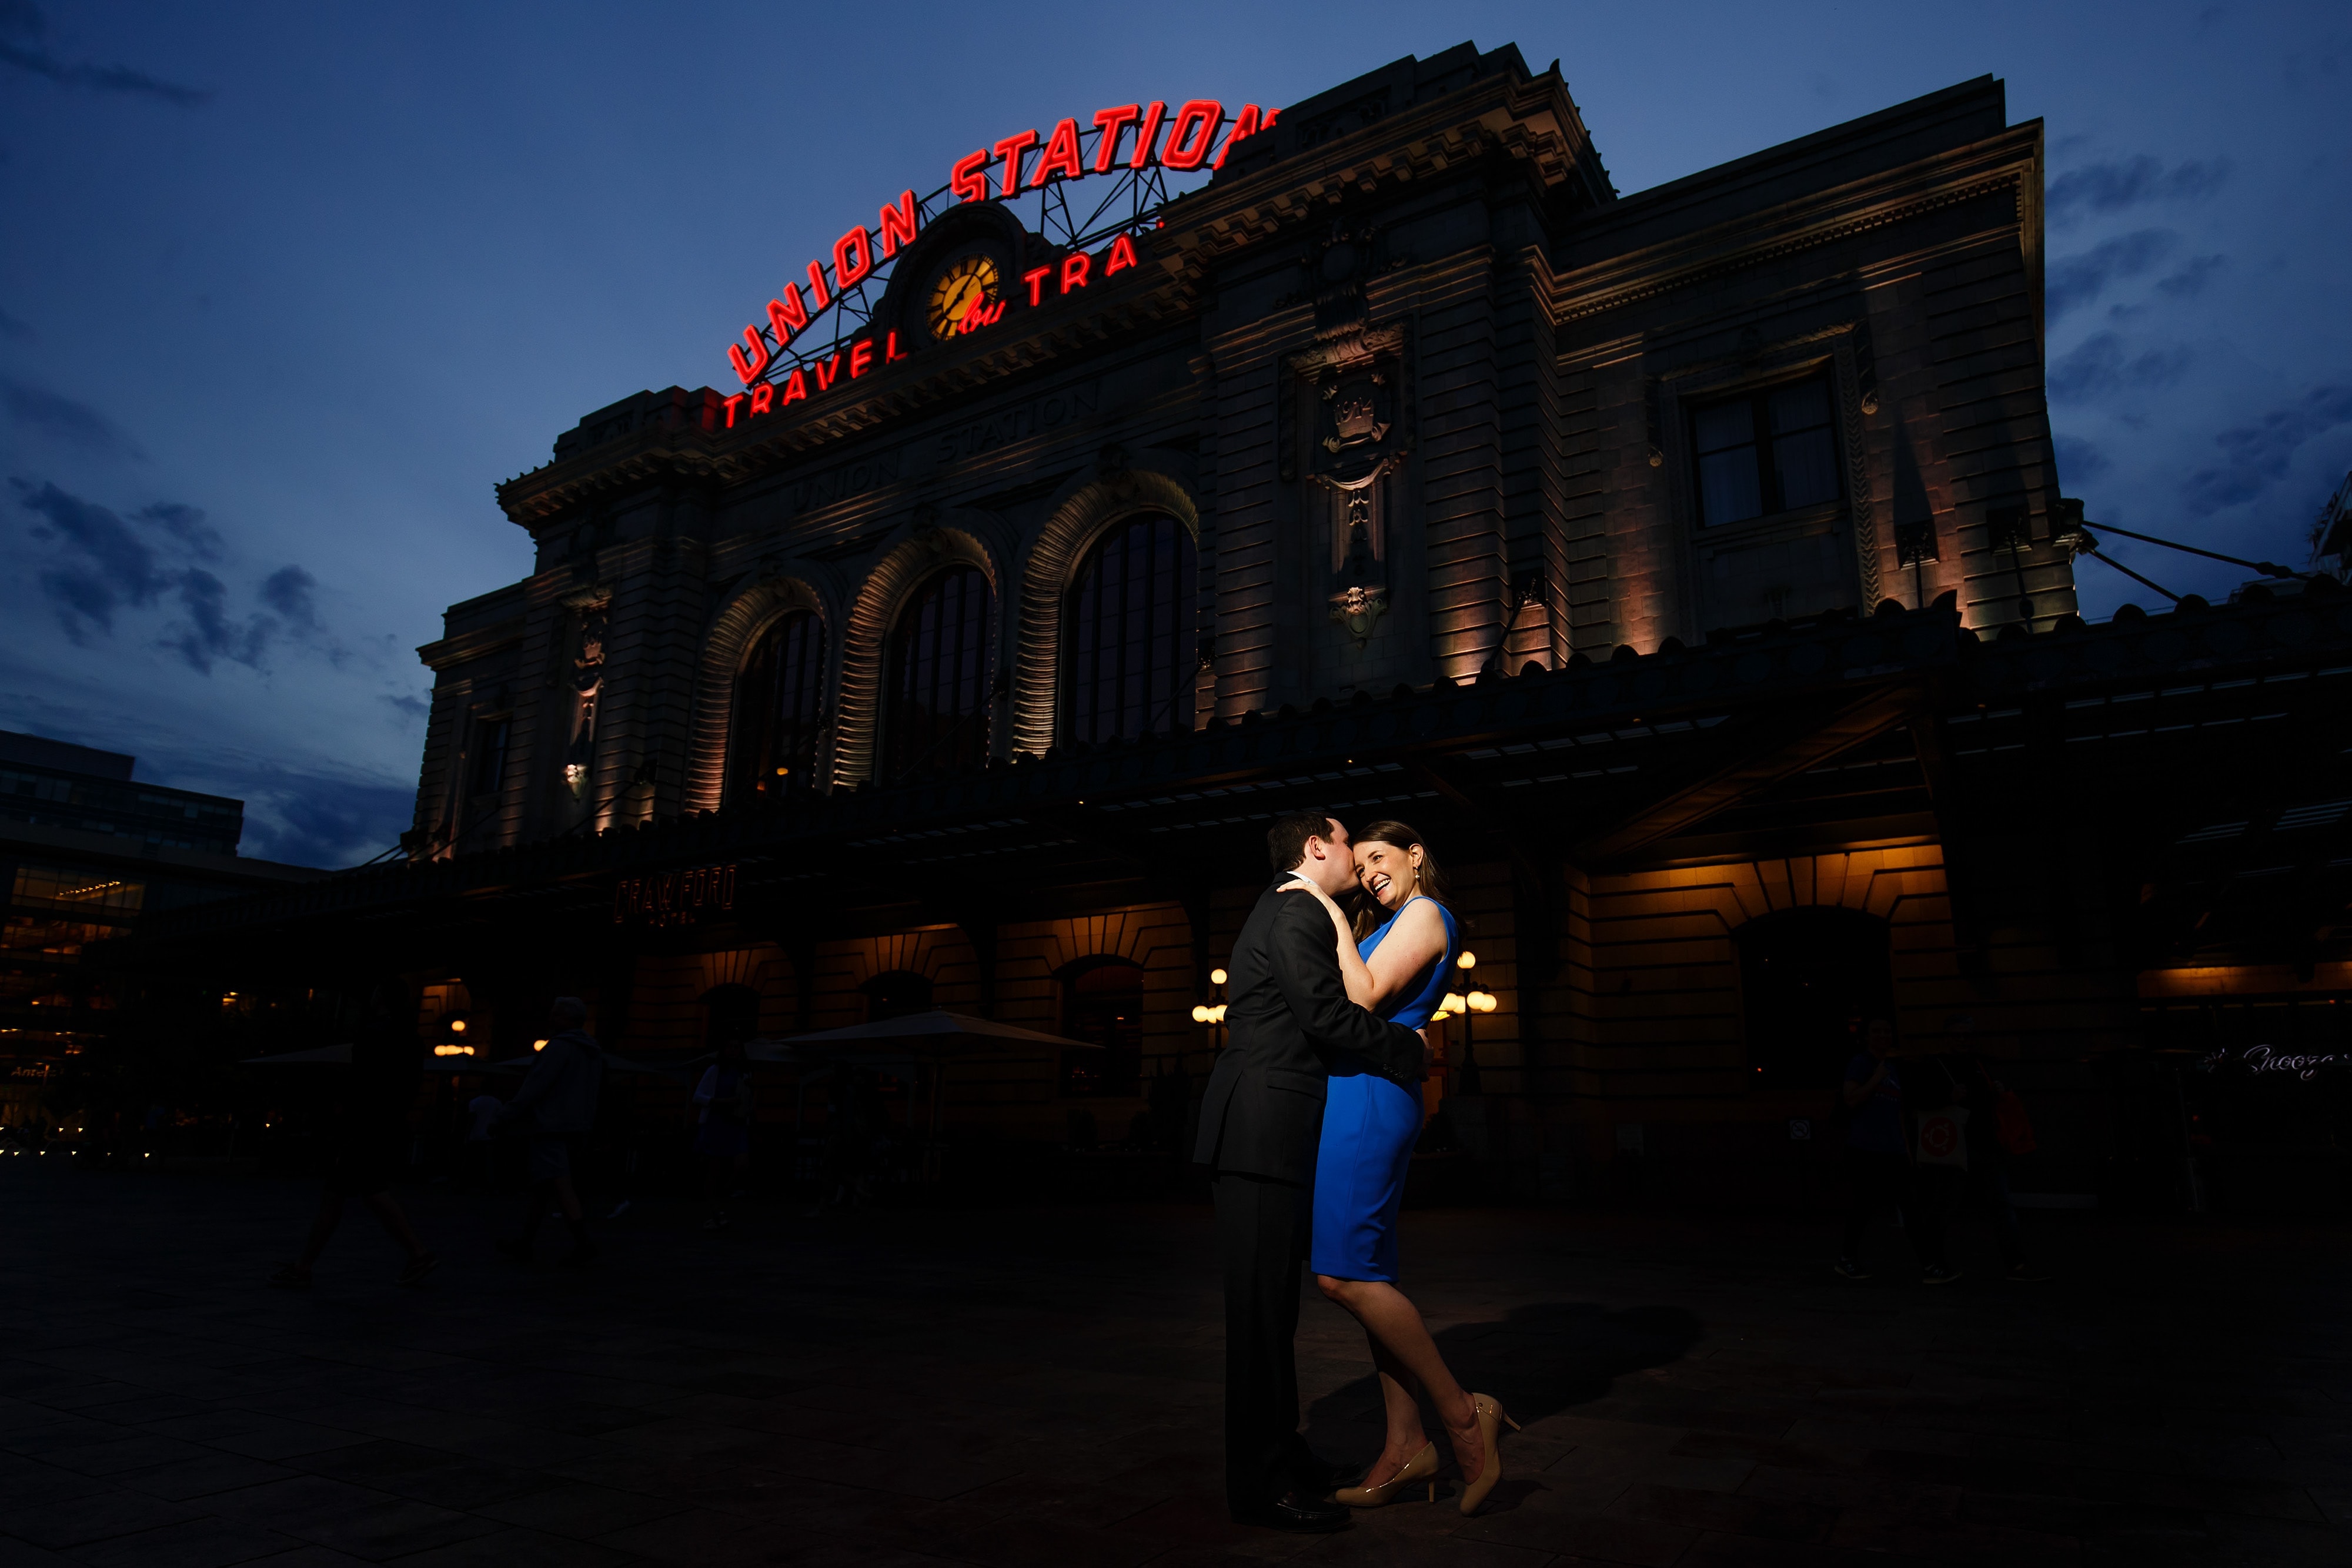 Joel kisses Katie in front of Denver's Union Station during their spring engagement session at twilight